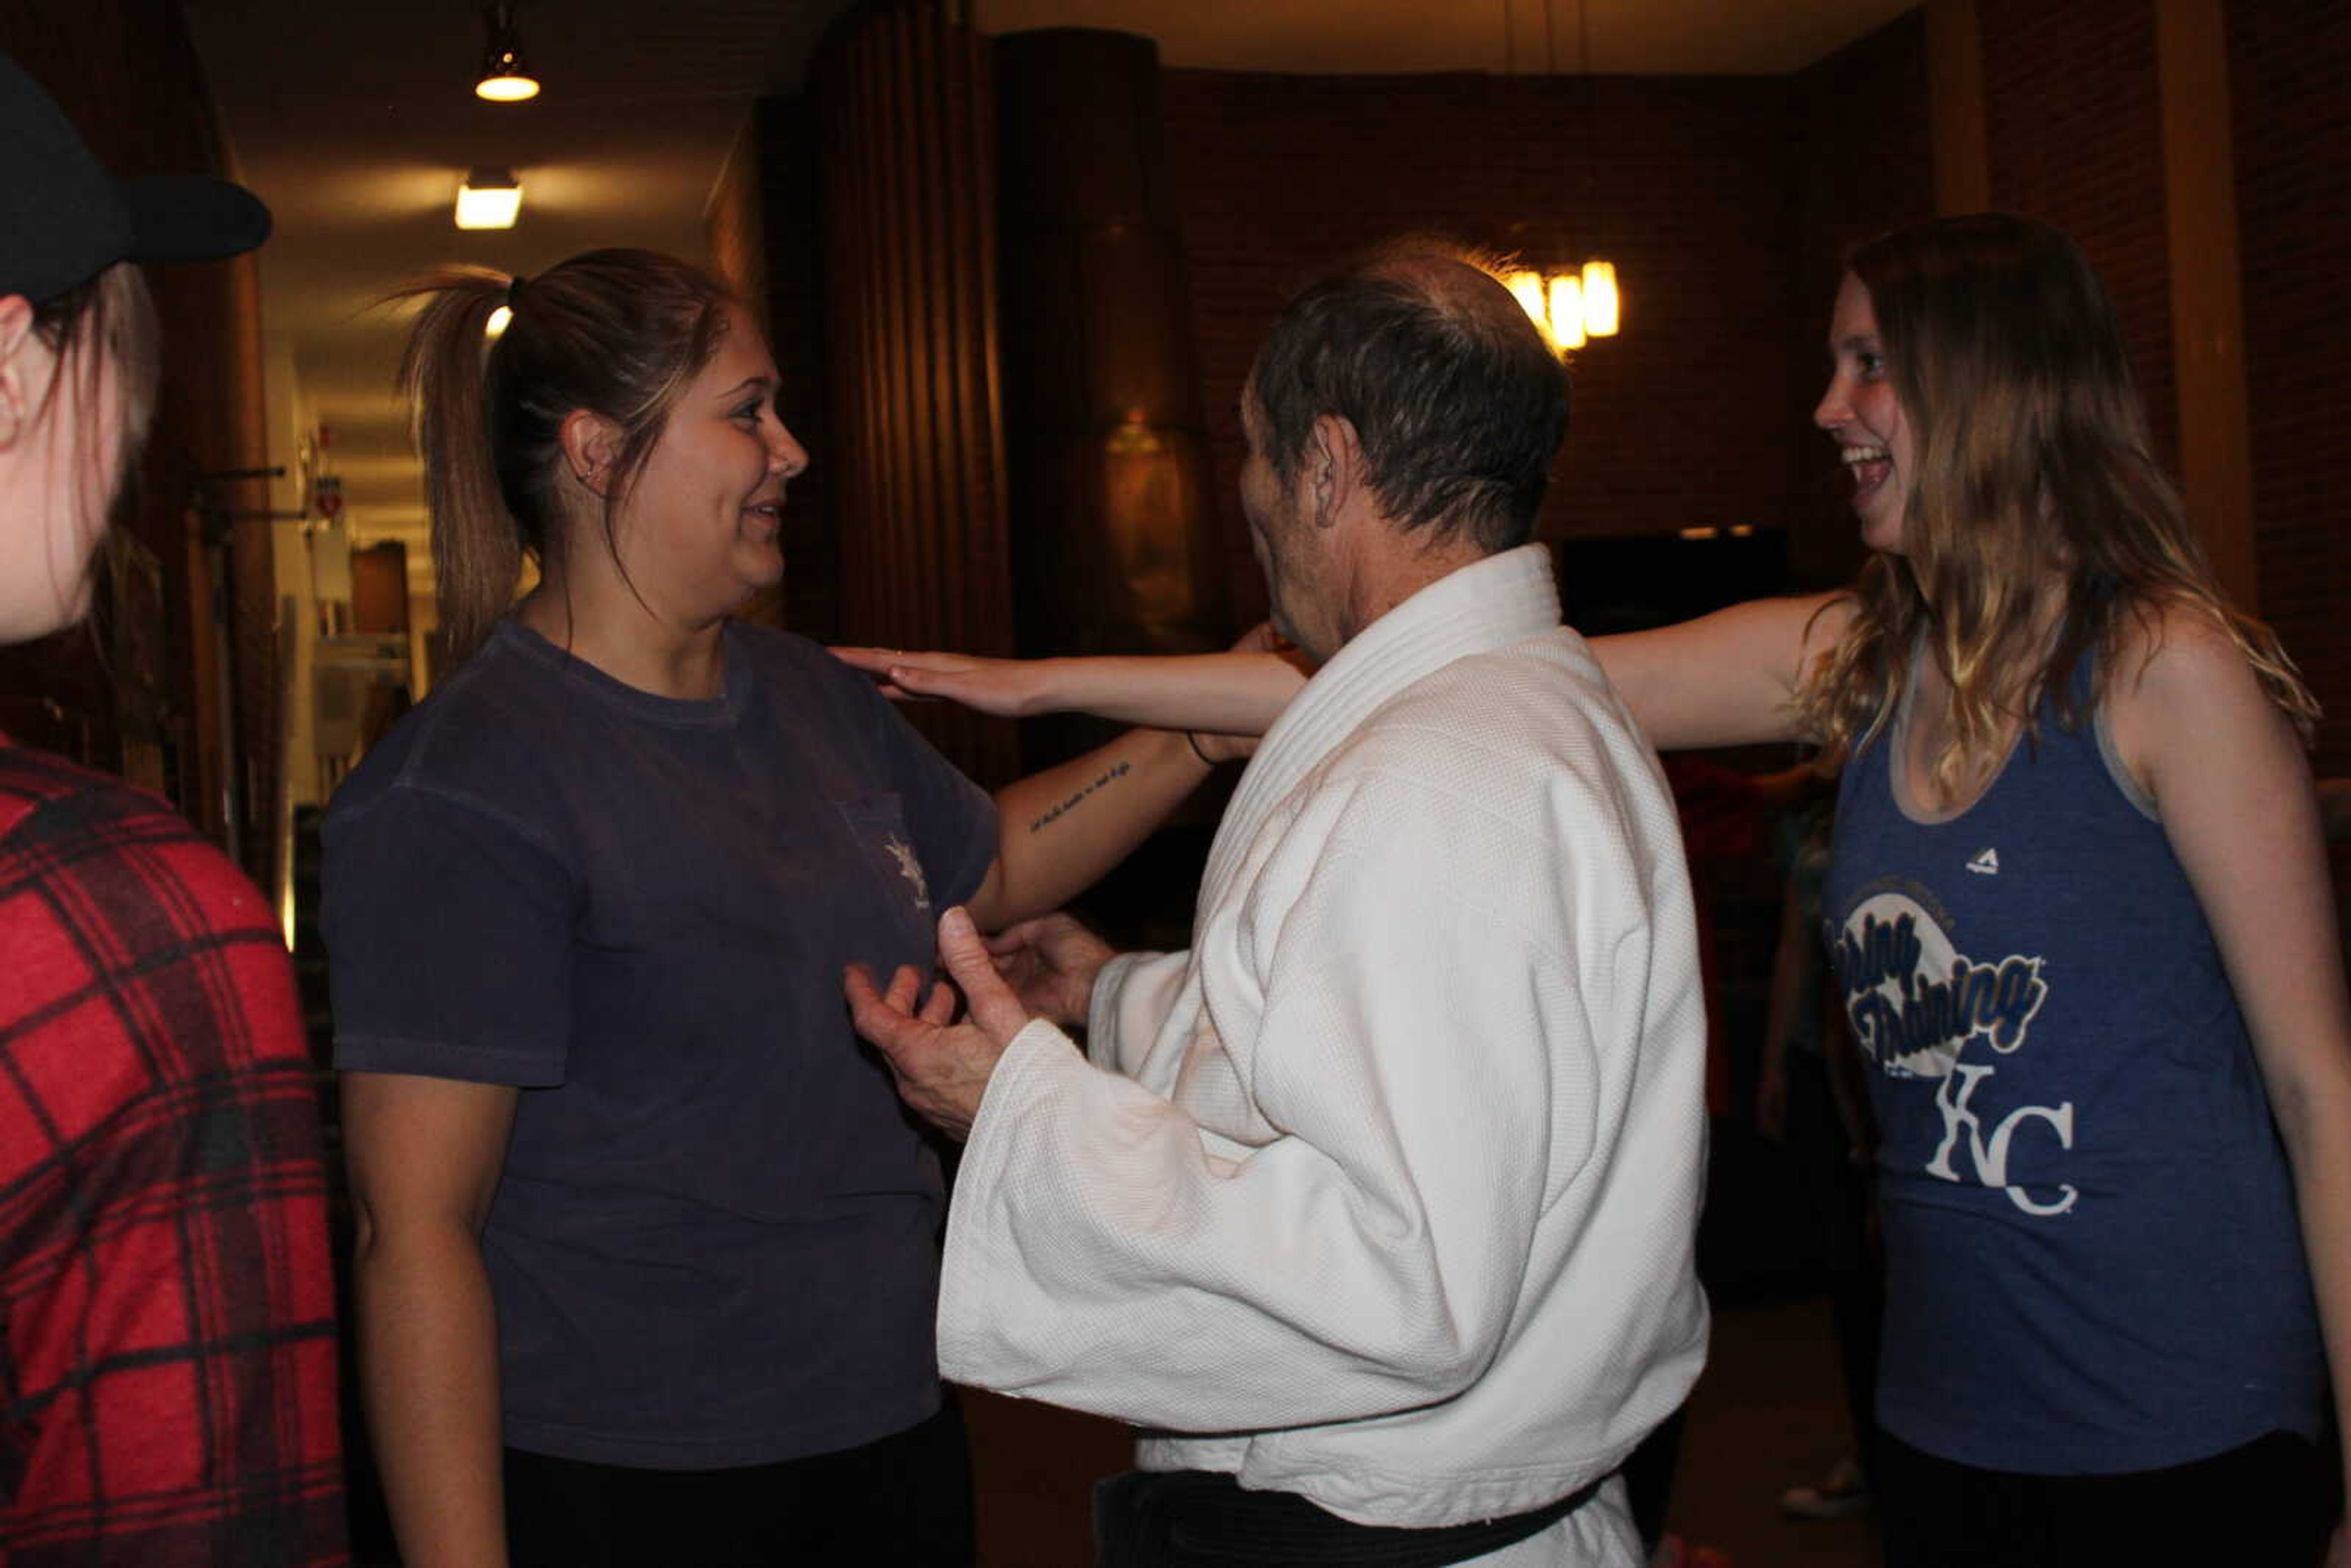 Self defense instructor Doug Johnson helps RAs Katy Armstrong and Alaina Mikkelsen perfect a technique they were just taught.